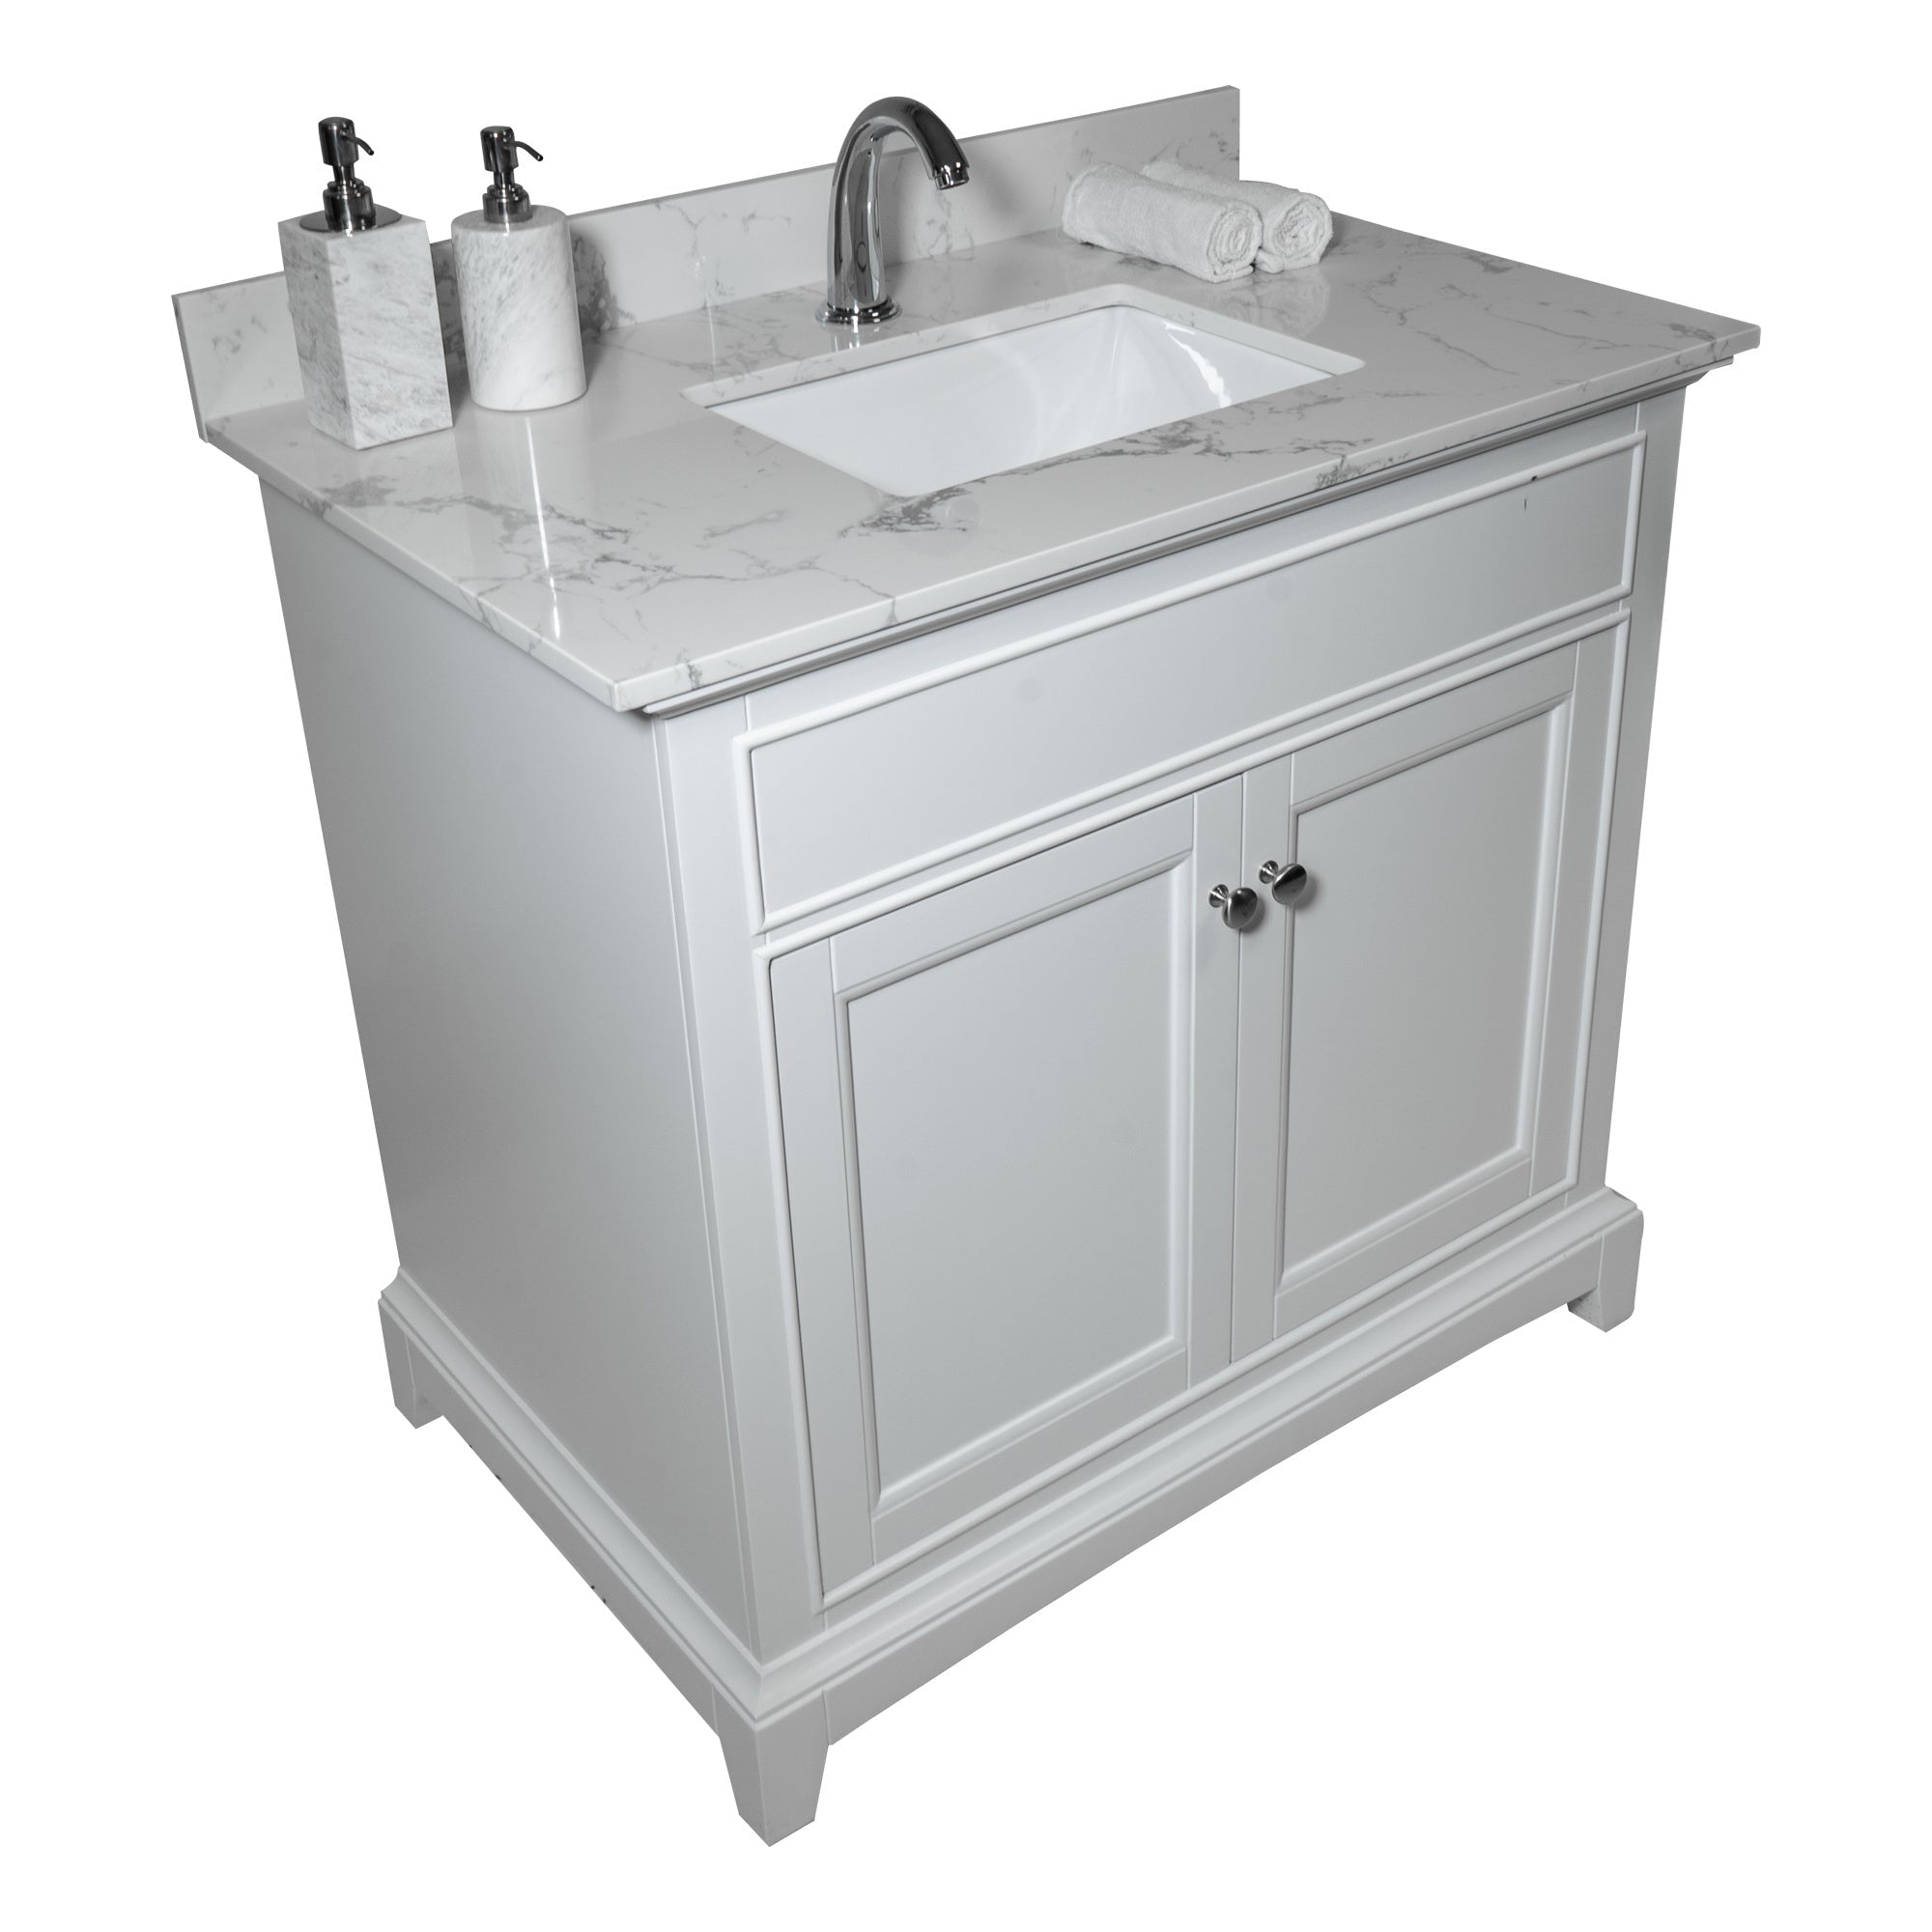 31inch bathroom stone vanity top engineered white marble color with undermount ceramic sink and single faucet hole with backsplash Moorescarts